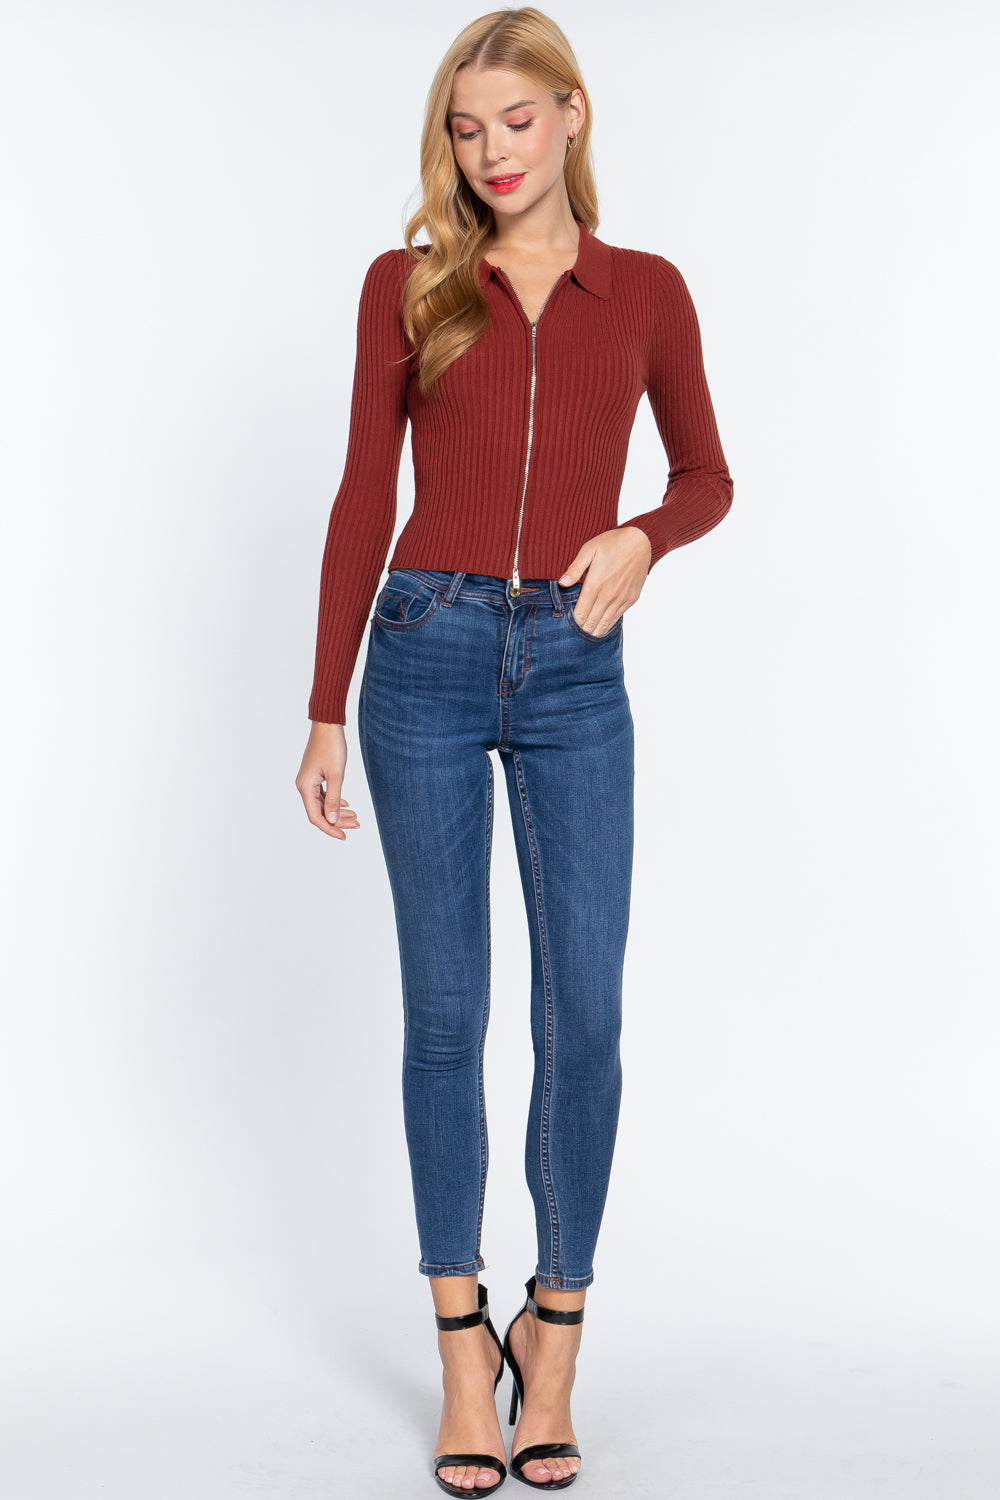 Notched Collar Zippered Sweater - Love It Clothing